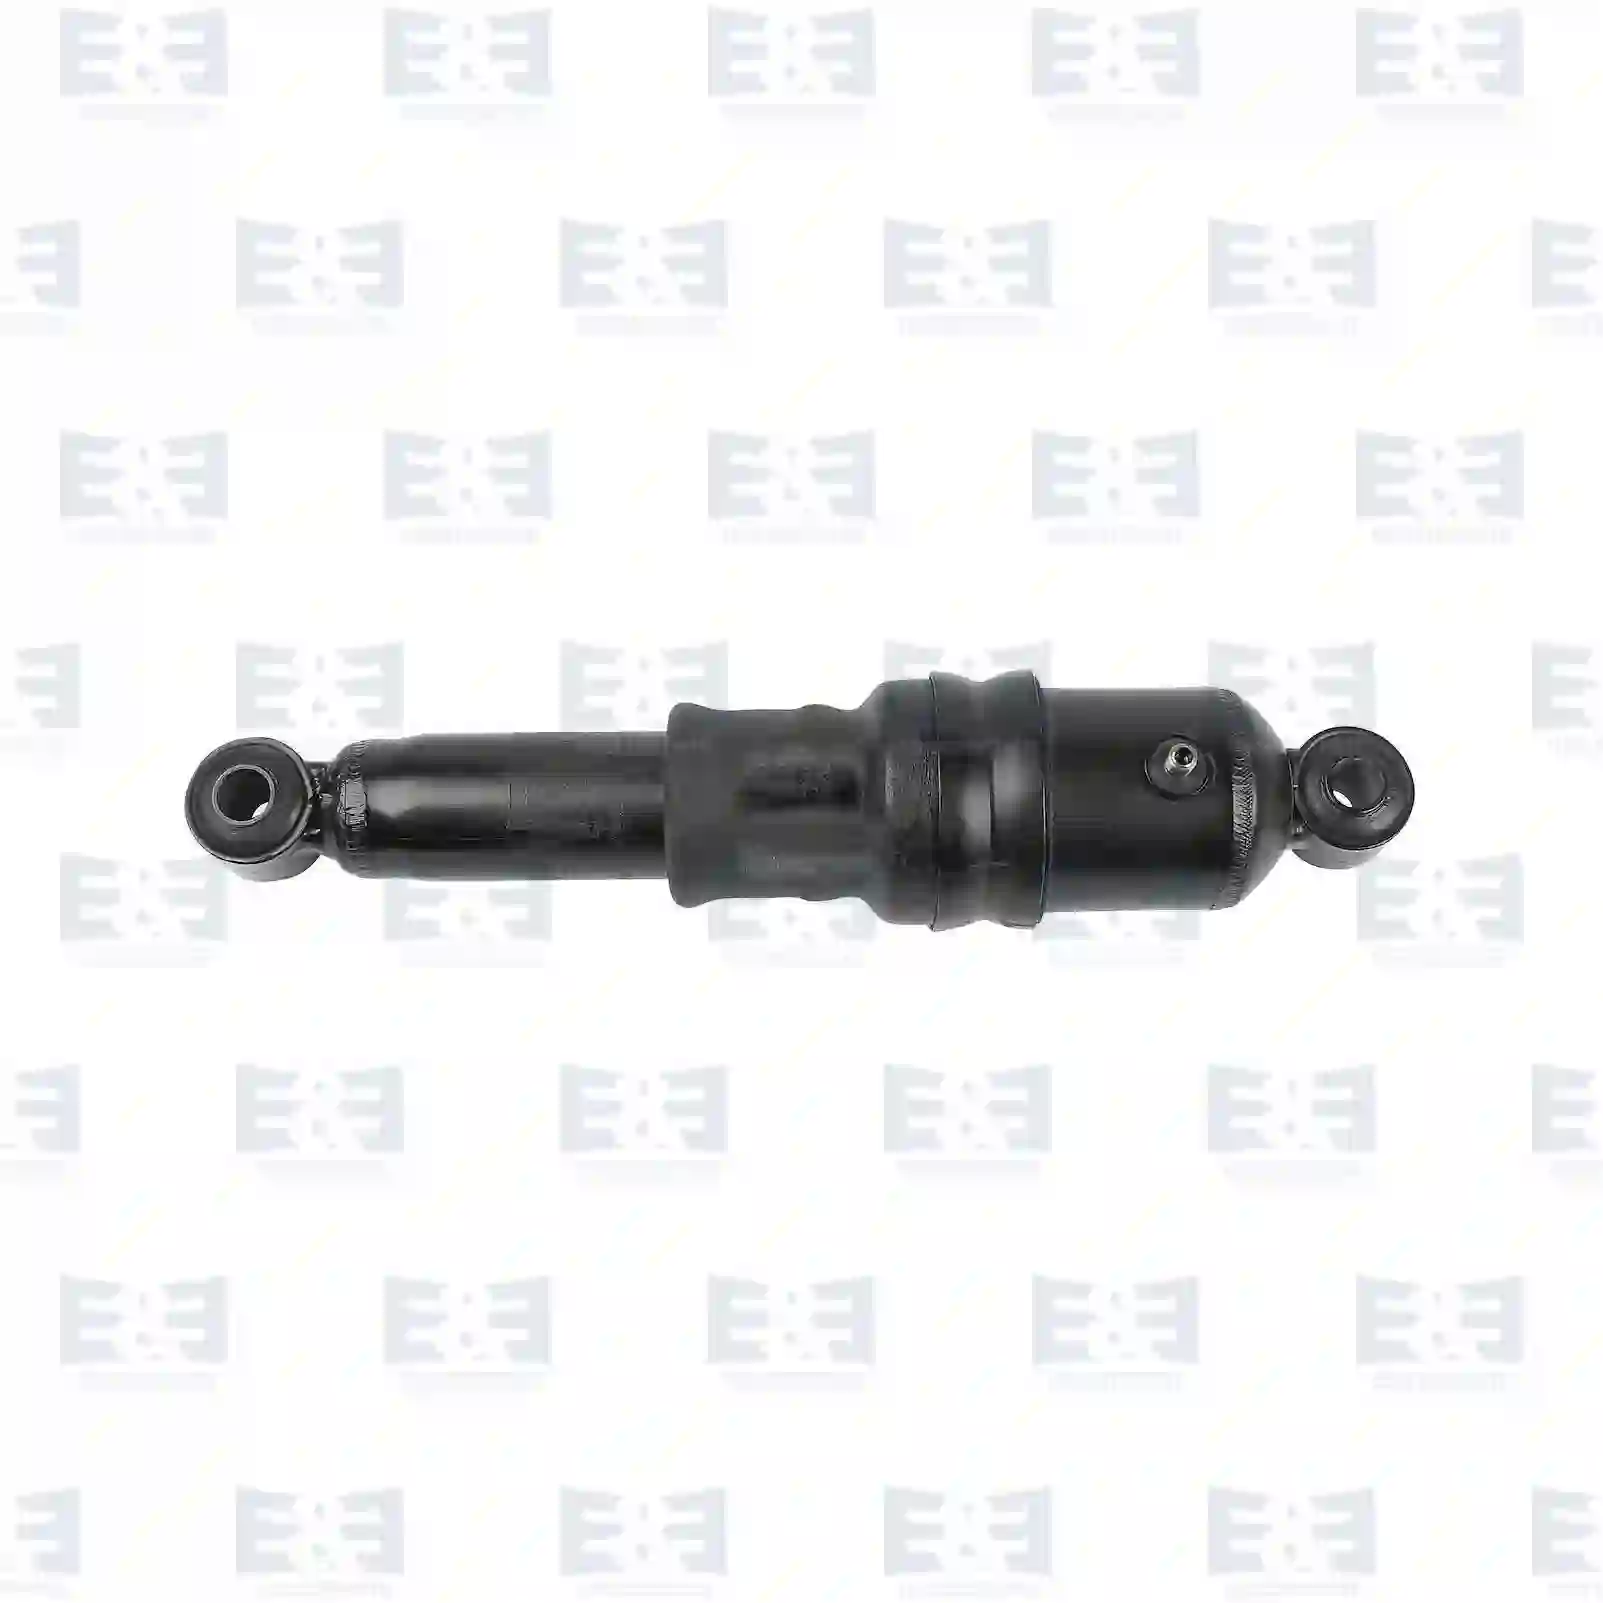  Cabin shock absorber || E&E Truck Spare Parts | Truck Spare Parts, Auotomotive Spare Parts